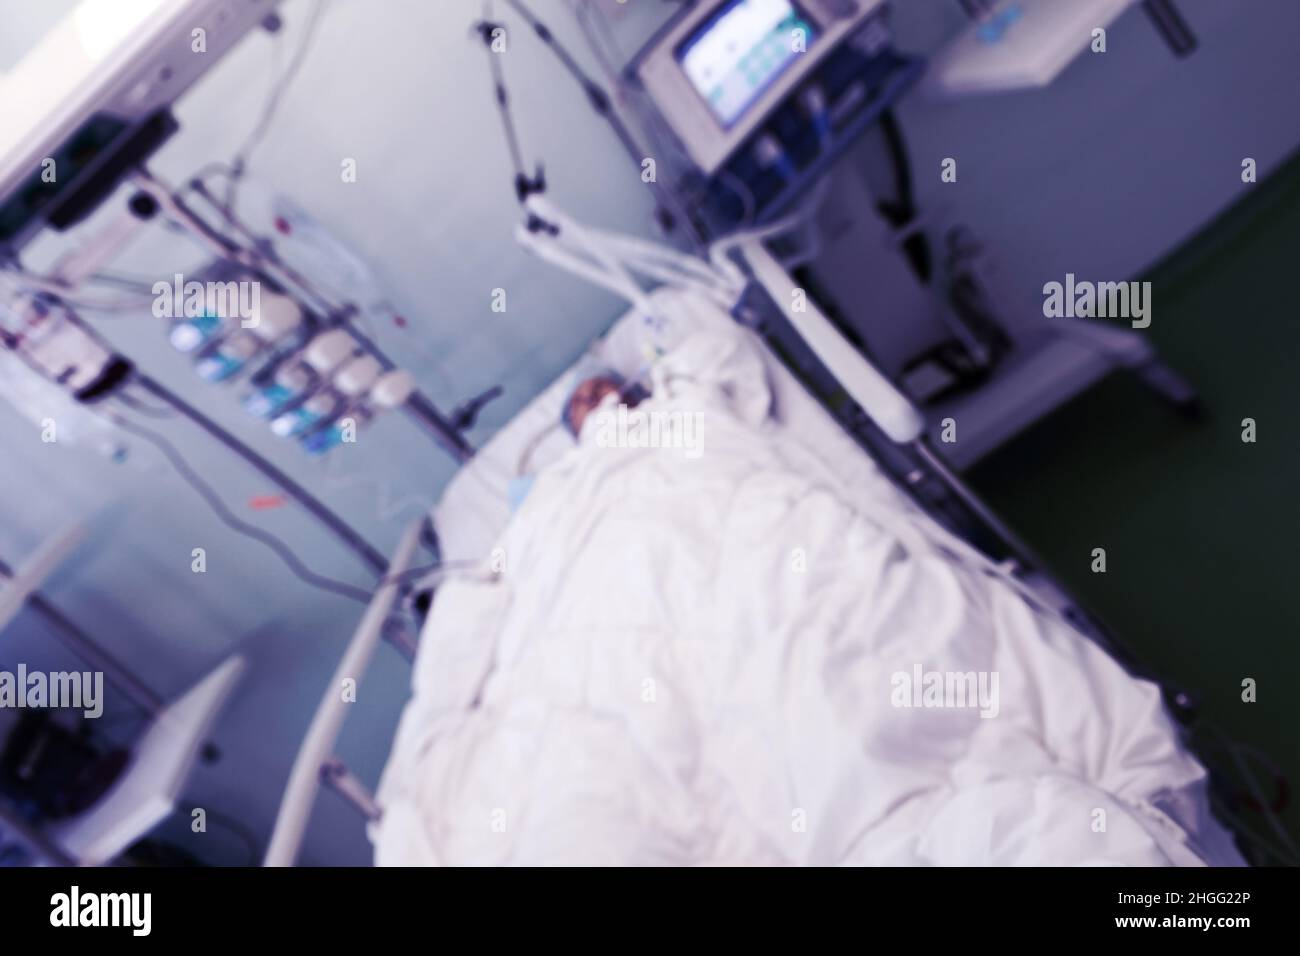 ICU ward interior with patient lying in bed, unfocused background. Stock Photo